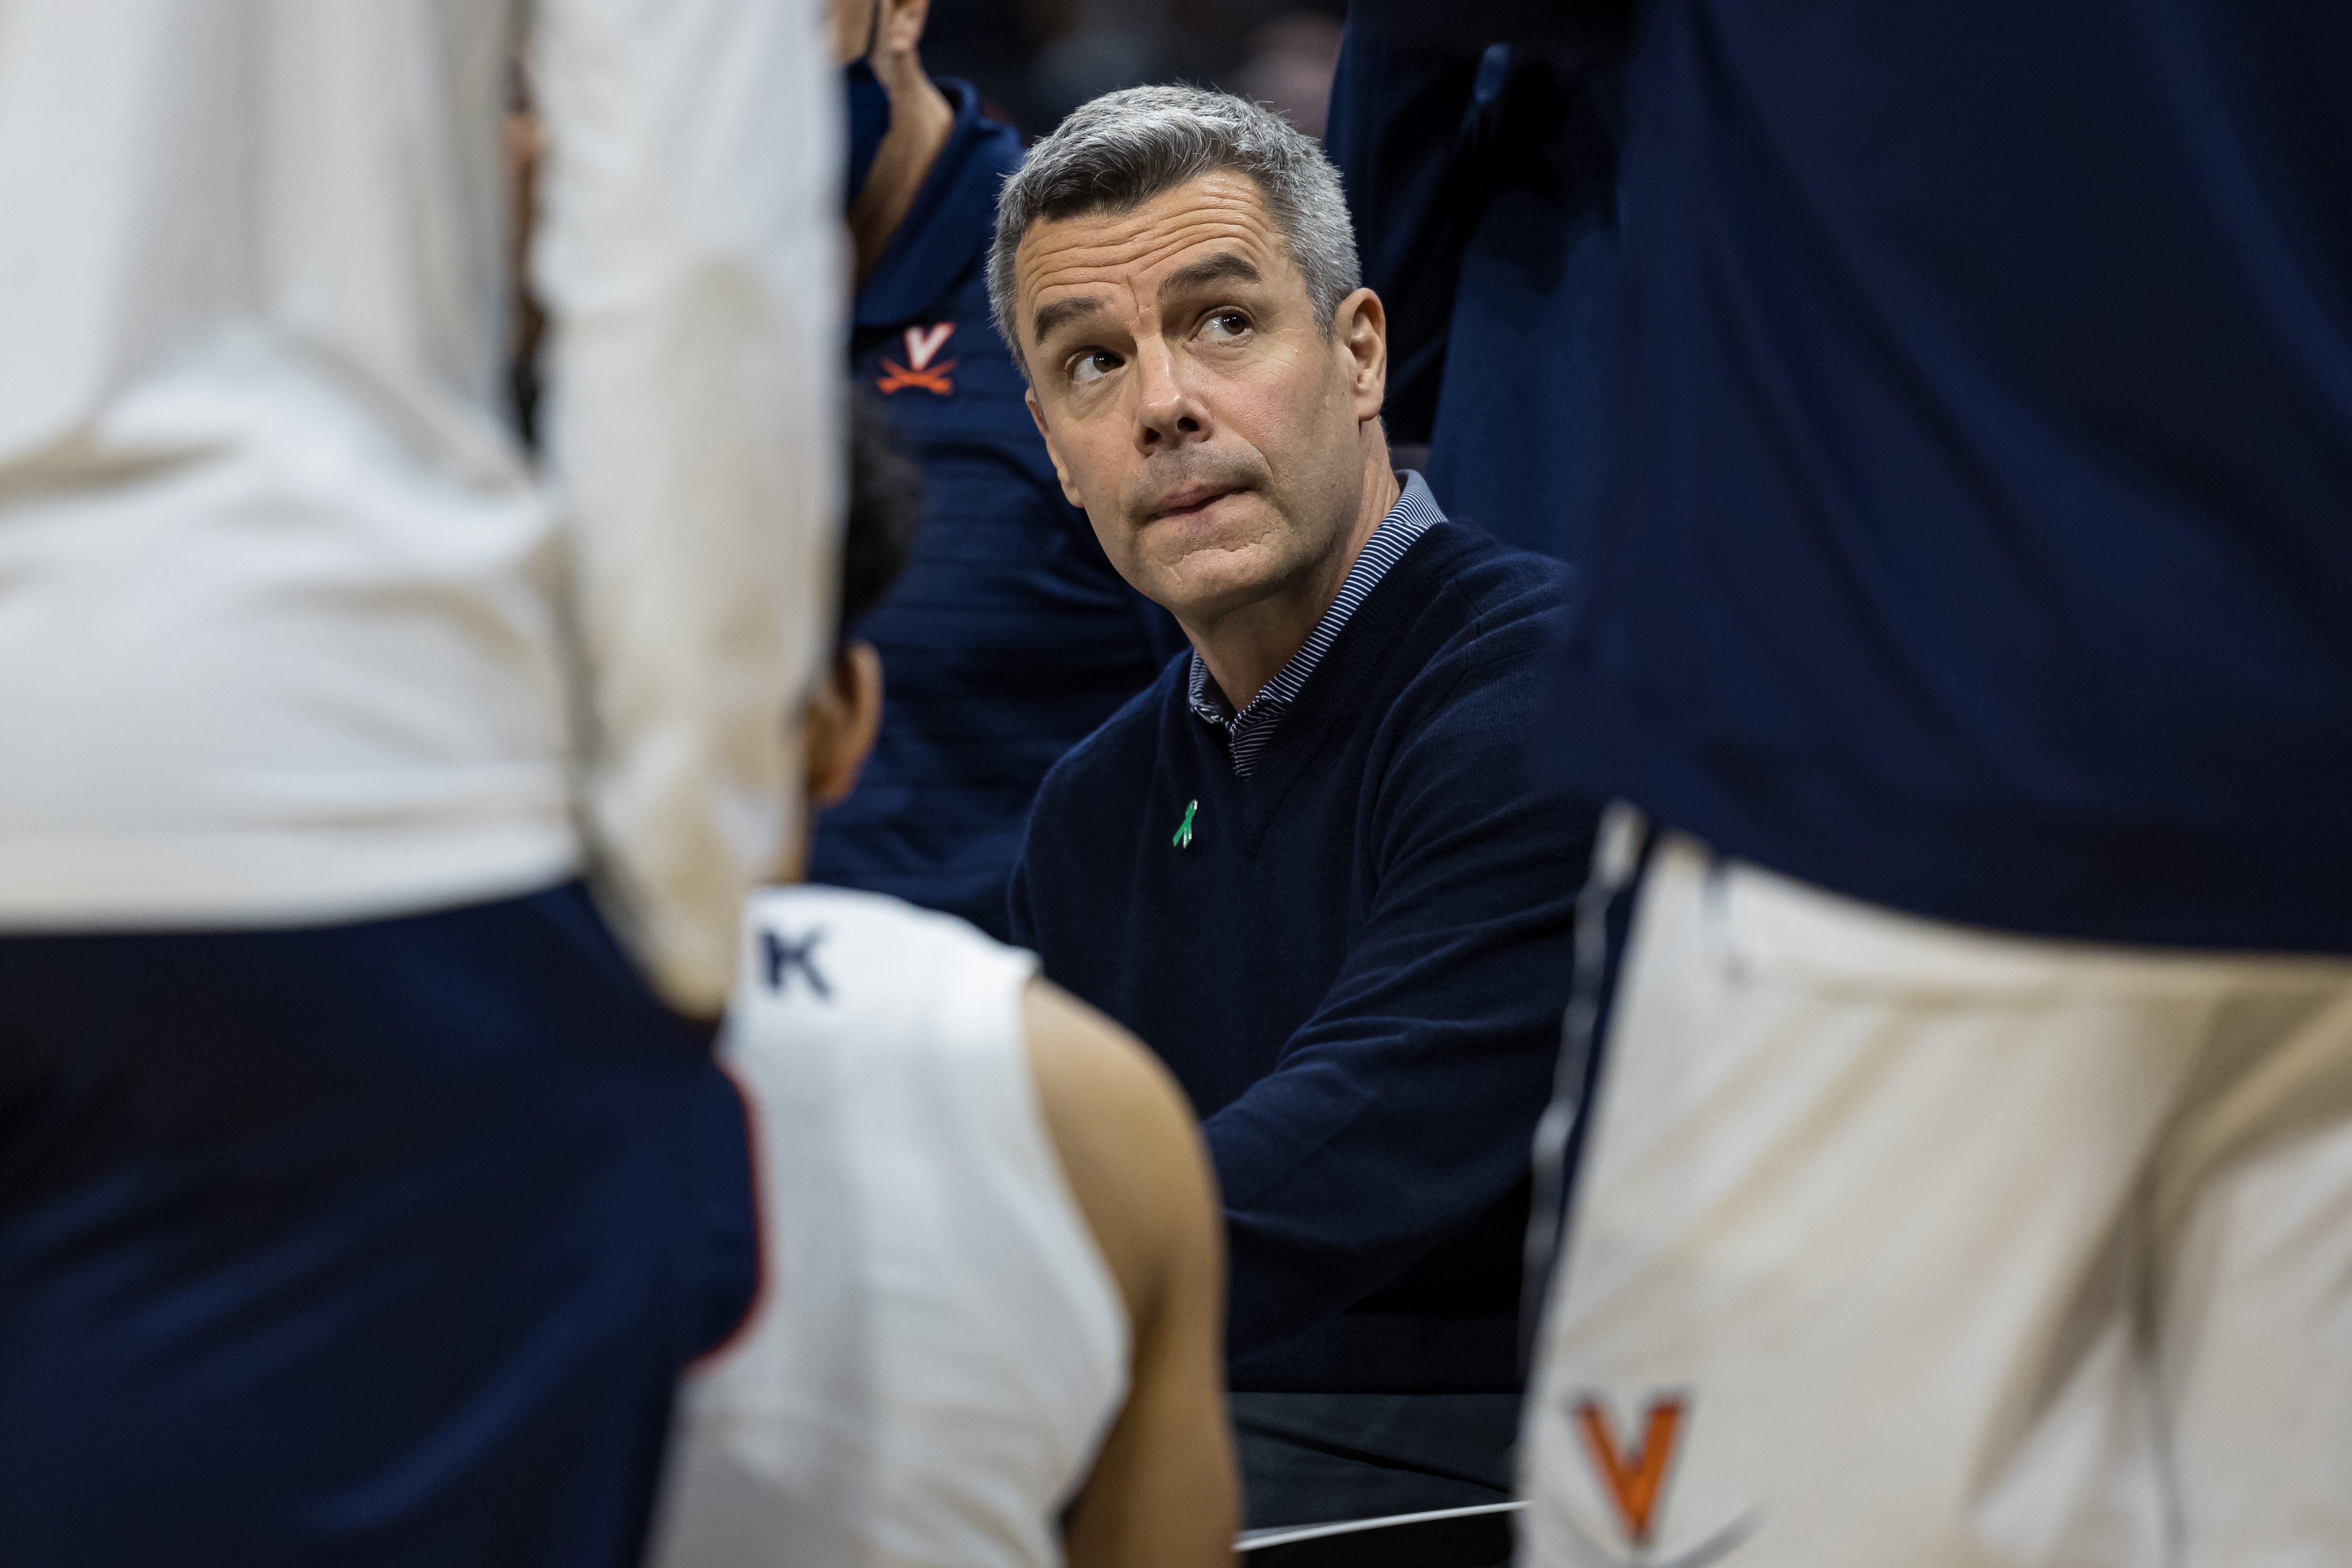 Virginia Cavaliers head coach Tony Bennett looks on from a team huddle during the second half of the game against the Iowa Hawkeyes, Monday, Nov. 29, 2021, at John Paul Jones Arena in Charlottesville, Va.